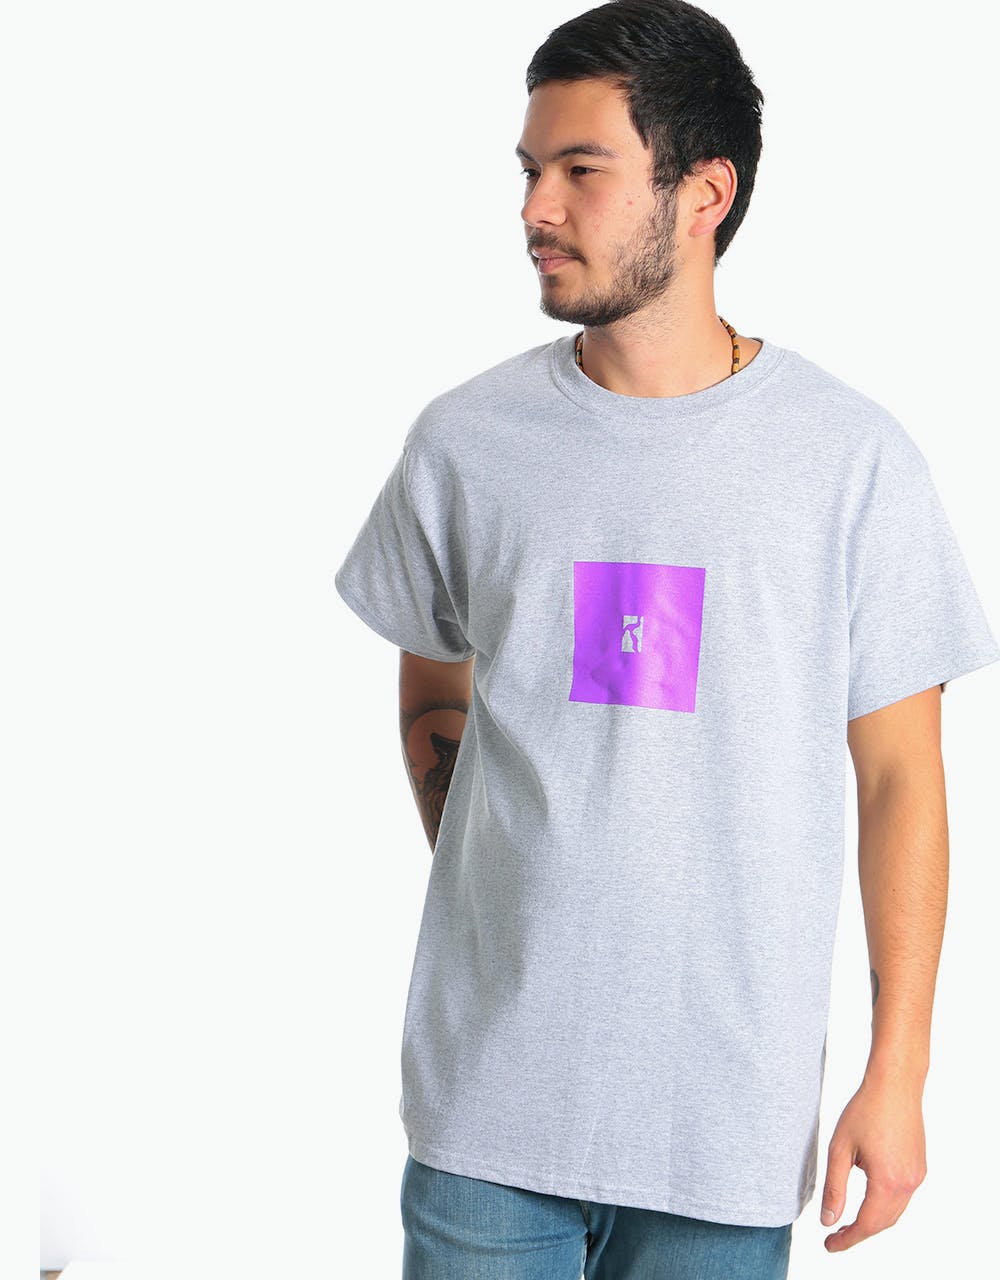 Poetic Collective Box T-Shirt - Grey